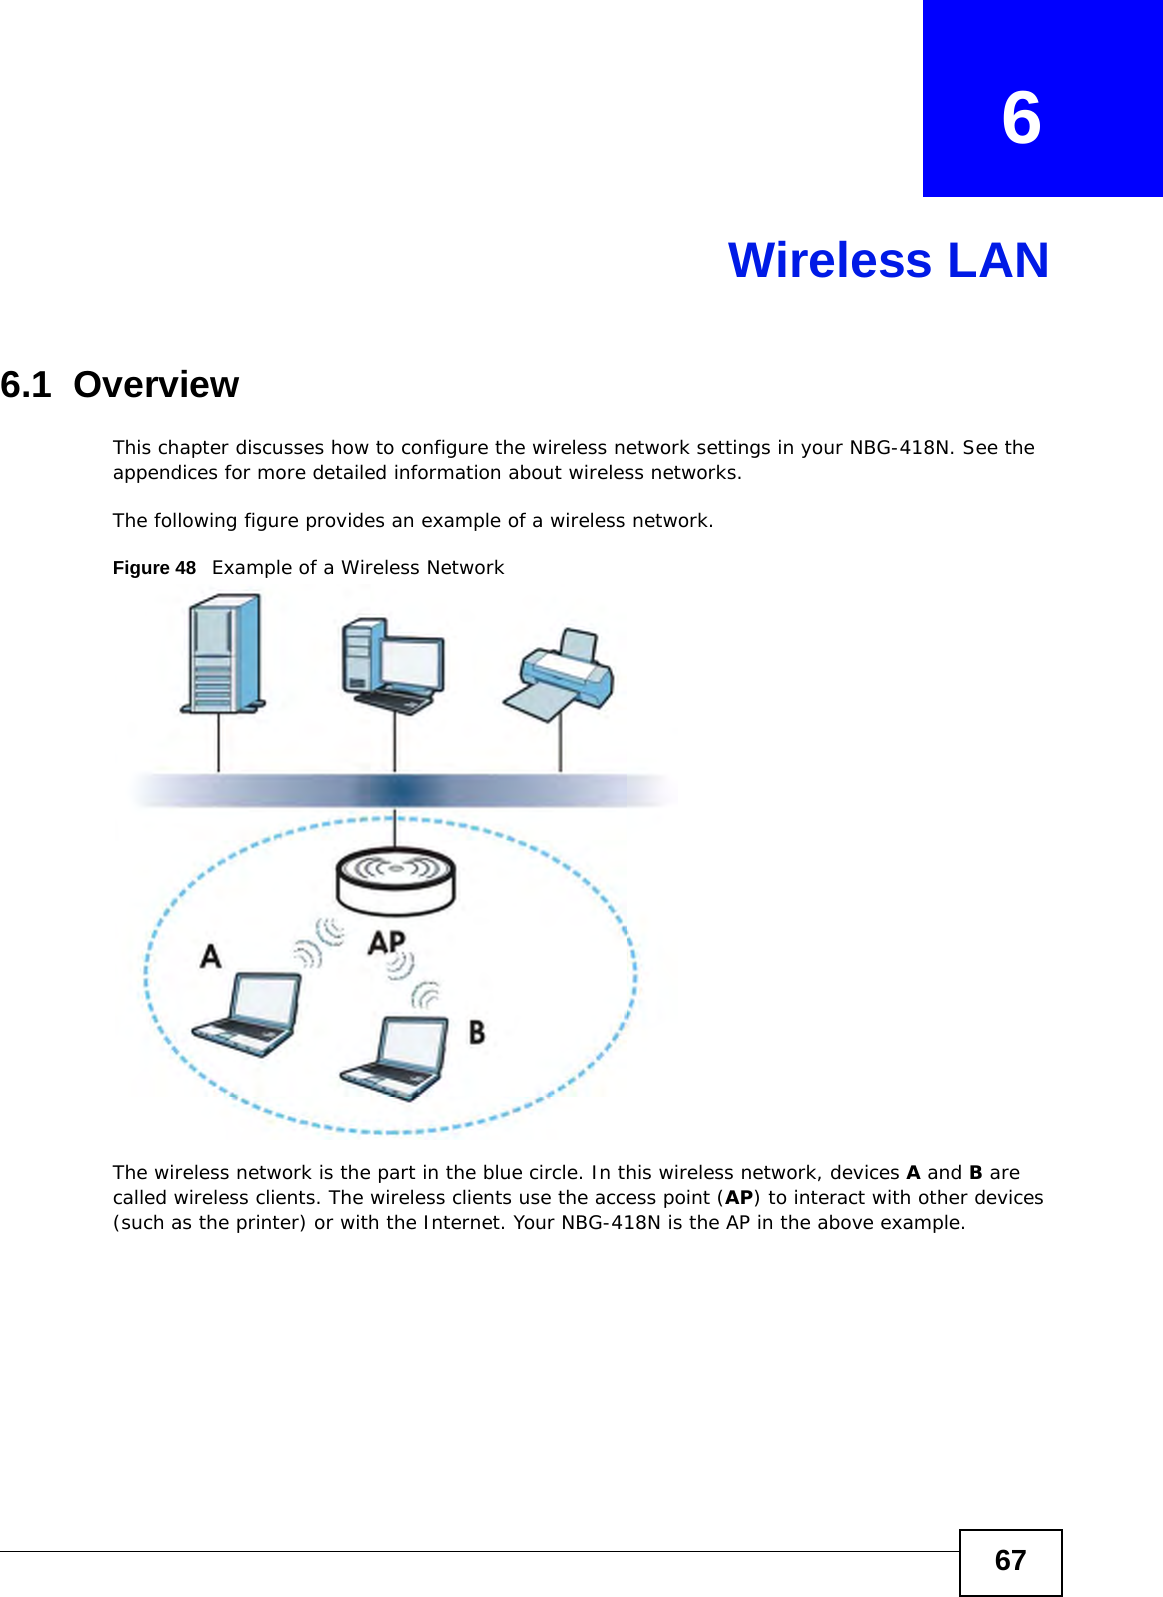 67CHAPTER   6Wireless LAN6.1  OverviewThis chapter discusses how to configure the wireless network settings in your NBG-418N. See the appendices for more detailed information about wireless networks.The following figure provides an example of a wireless network.Figure 48   Example of a Wireless NetworkThe wireless network is the part in the blue circle. In this wireless network, devices A and B are called wireless clients. The wireless clients use the access point (AP) to interact with other devices (such as the printer) or with the Internet. Your NBG-418N is the AP in the above example.